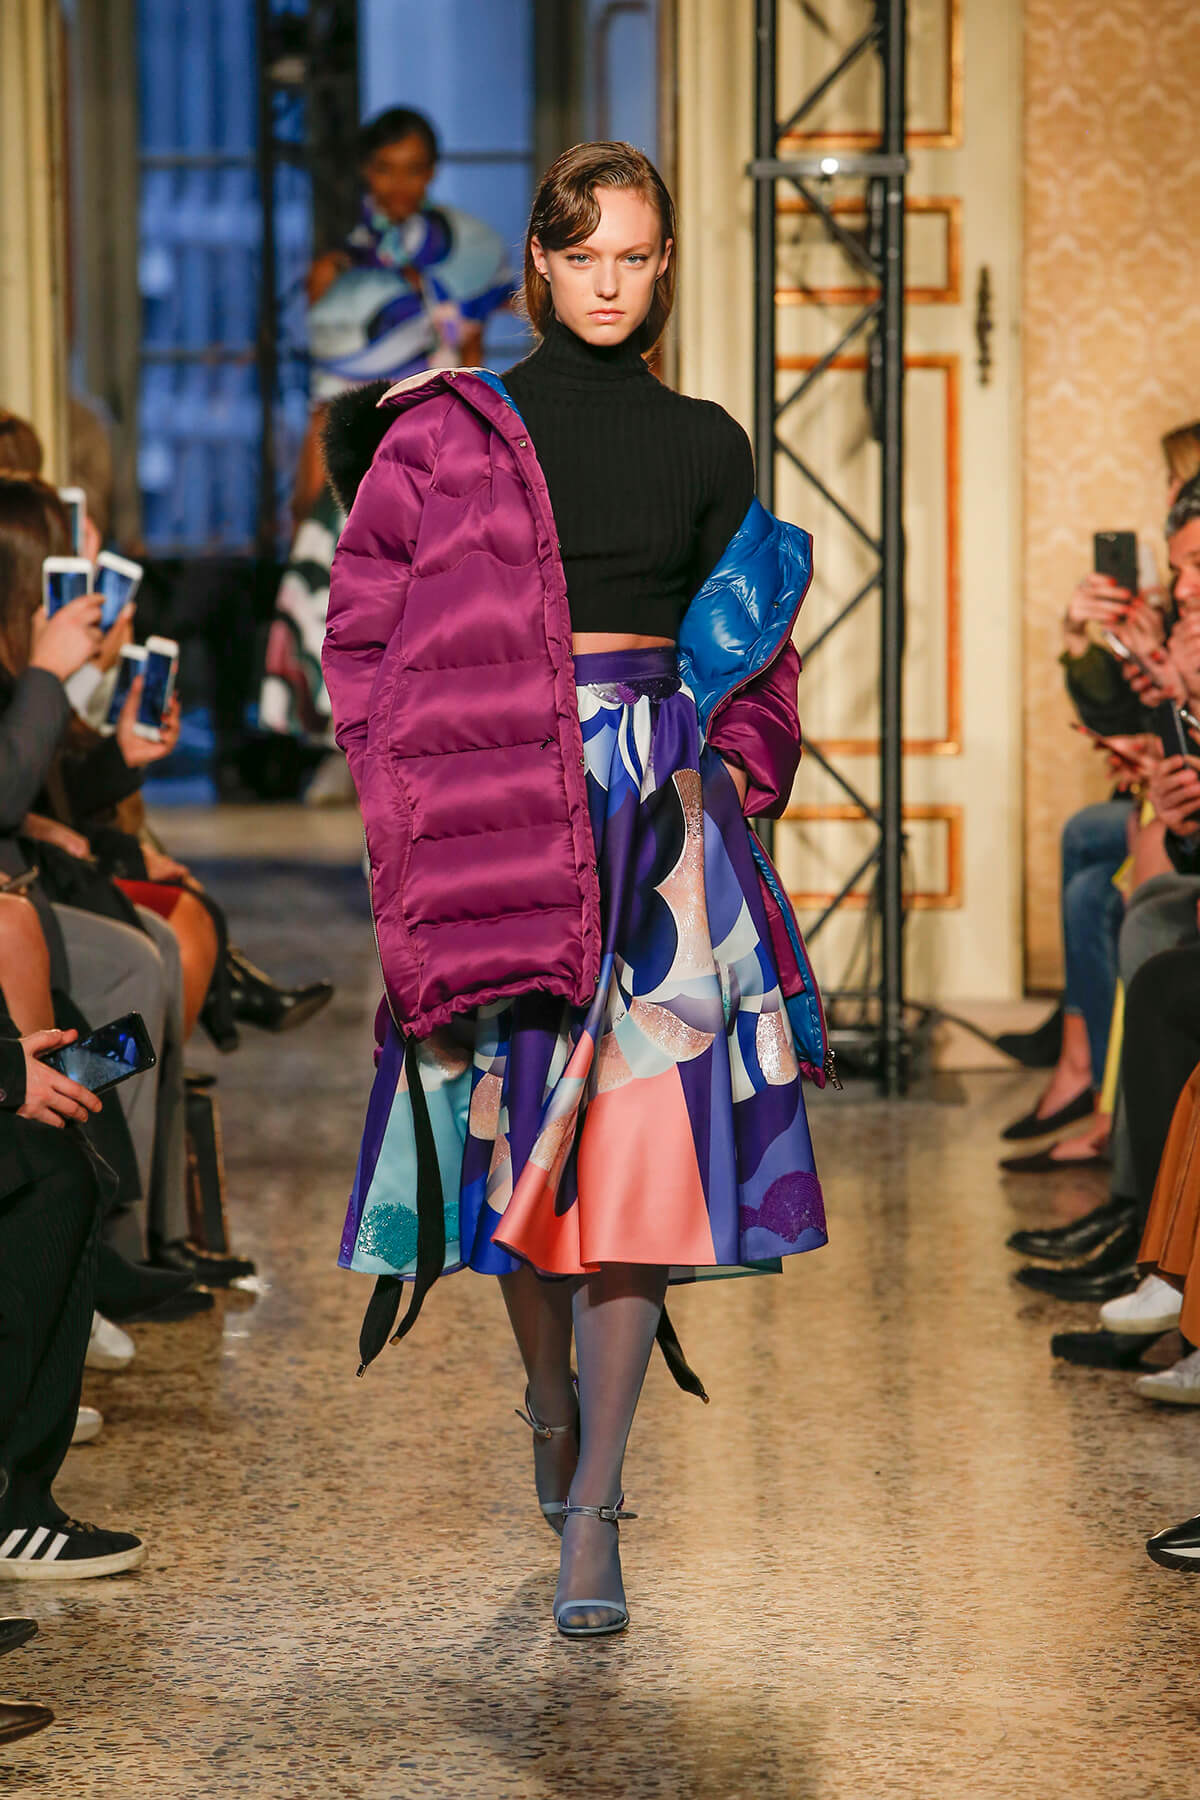 Model on catwalk wearing a purple puffer jacket and colourful skirt